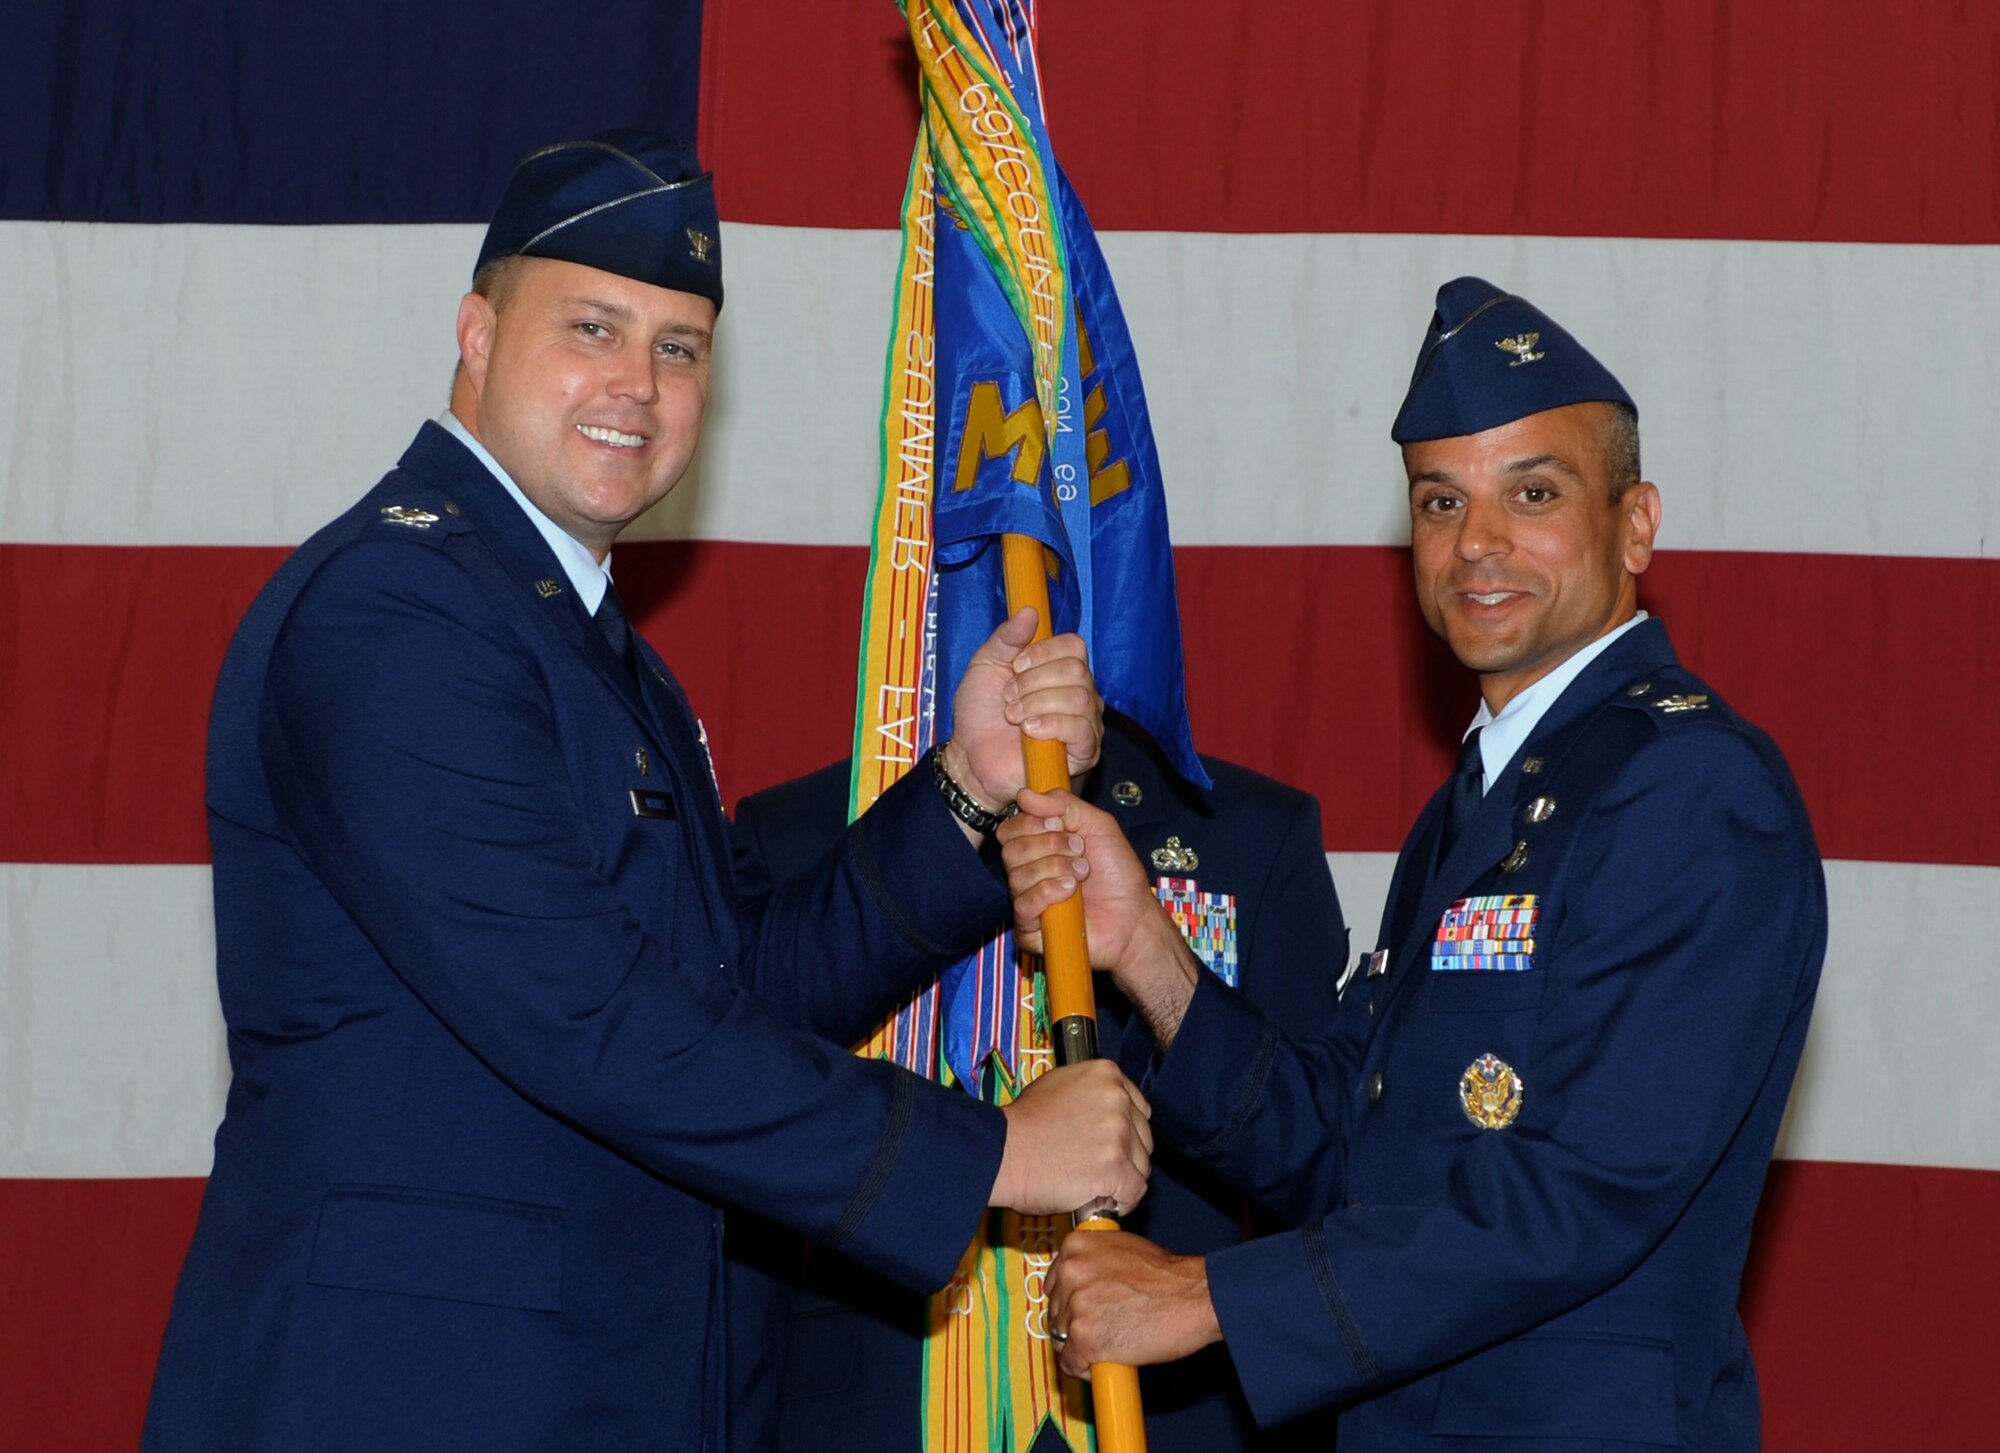 Col. John Nichols, 14th Flying Training Wing Commander, passes the 14th Mission Support Group guidon to Col. Anthony Sansano, the new 14th MSG Commander, during a change of command ceremony June 16 at Columbus Air Force Base, Mississippi. (U.S. Air Force photo/Elizabeth Owens)